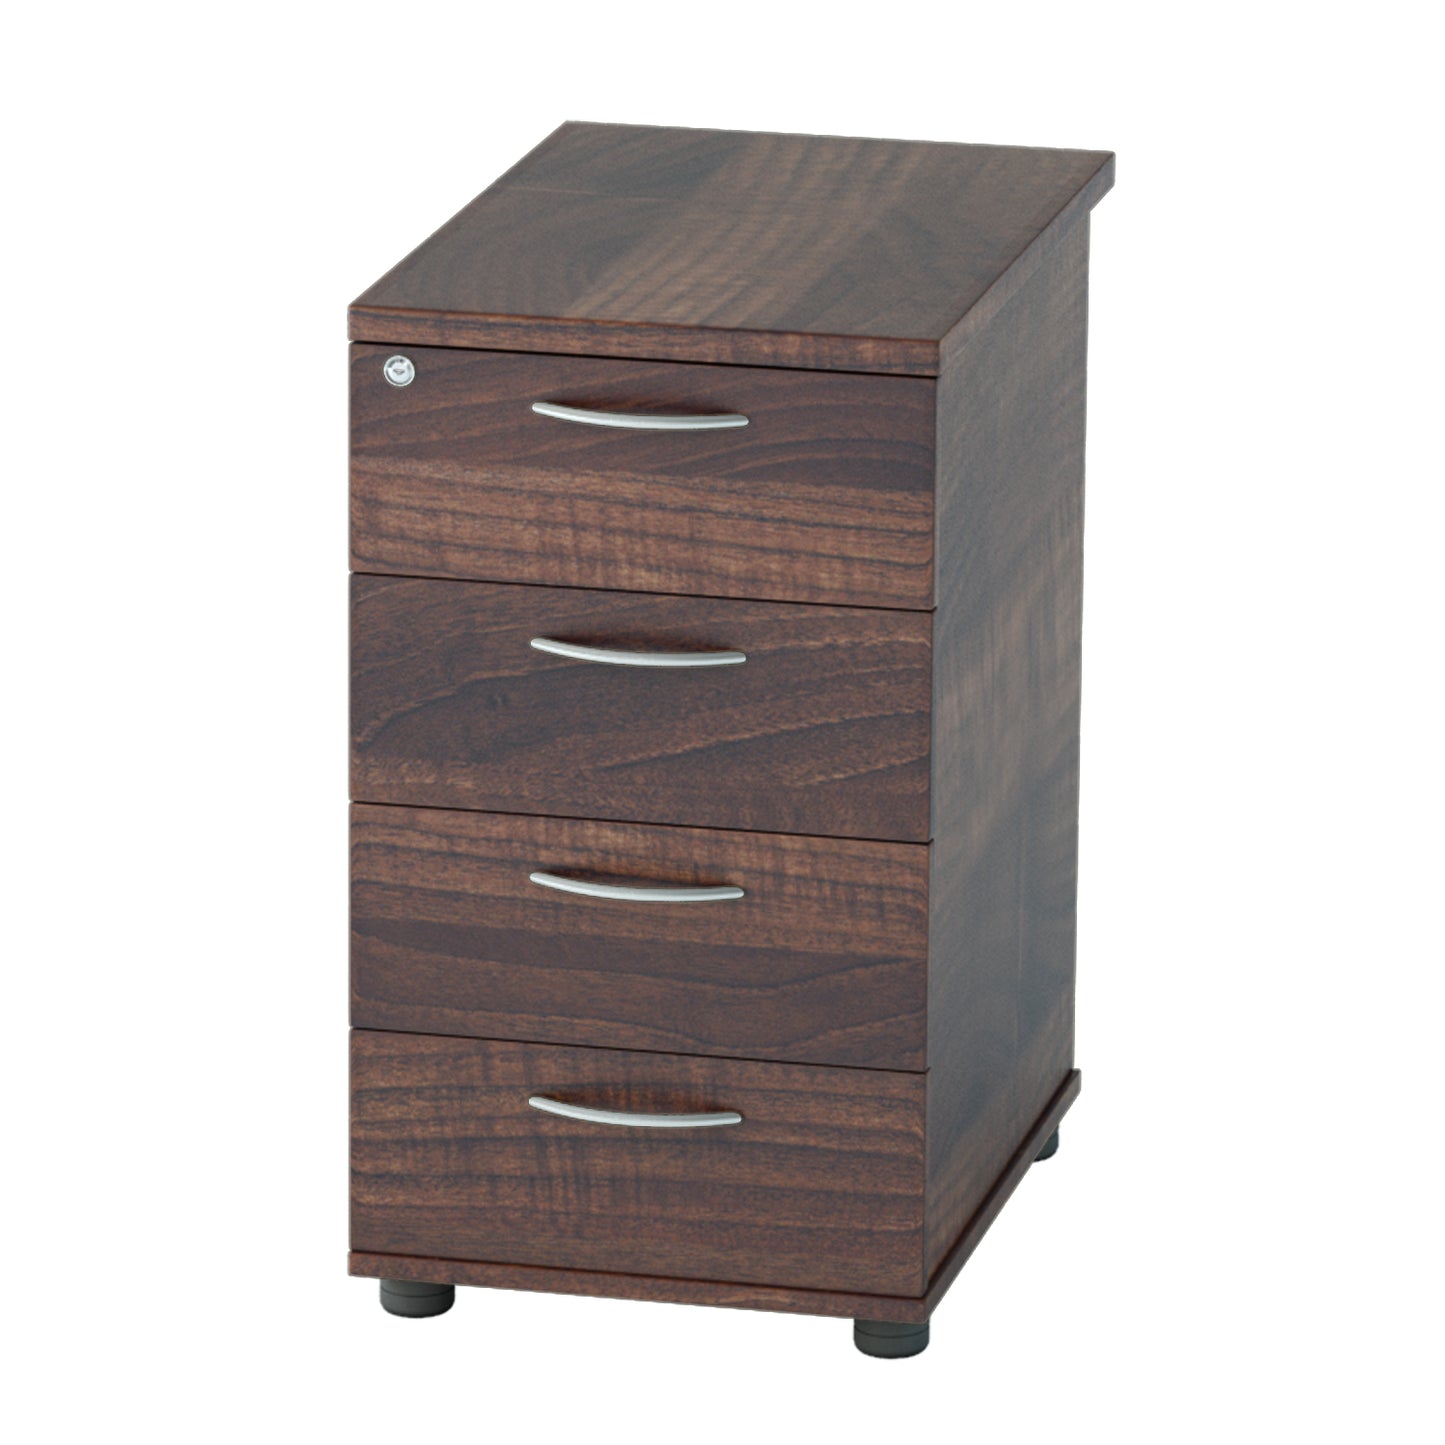 Satellite Pedestal 3 or 4 drawer desk high (available in 2 sizes)